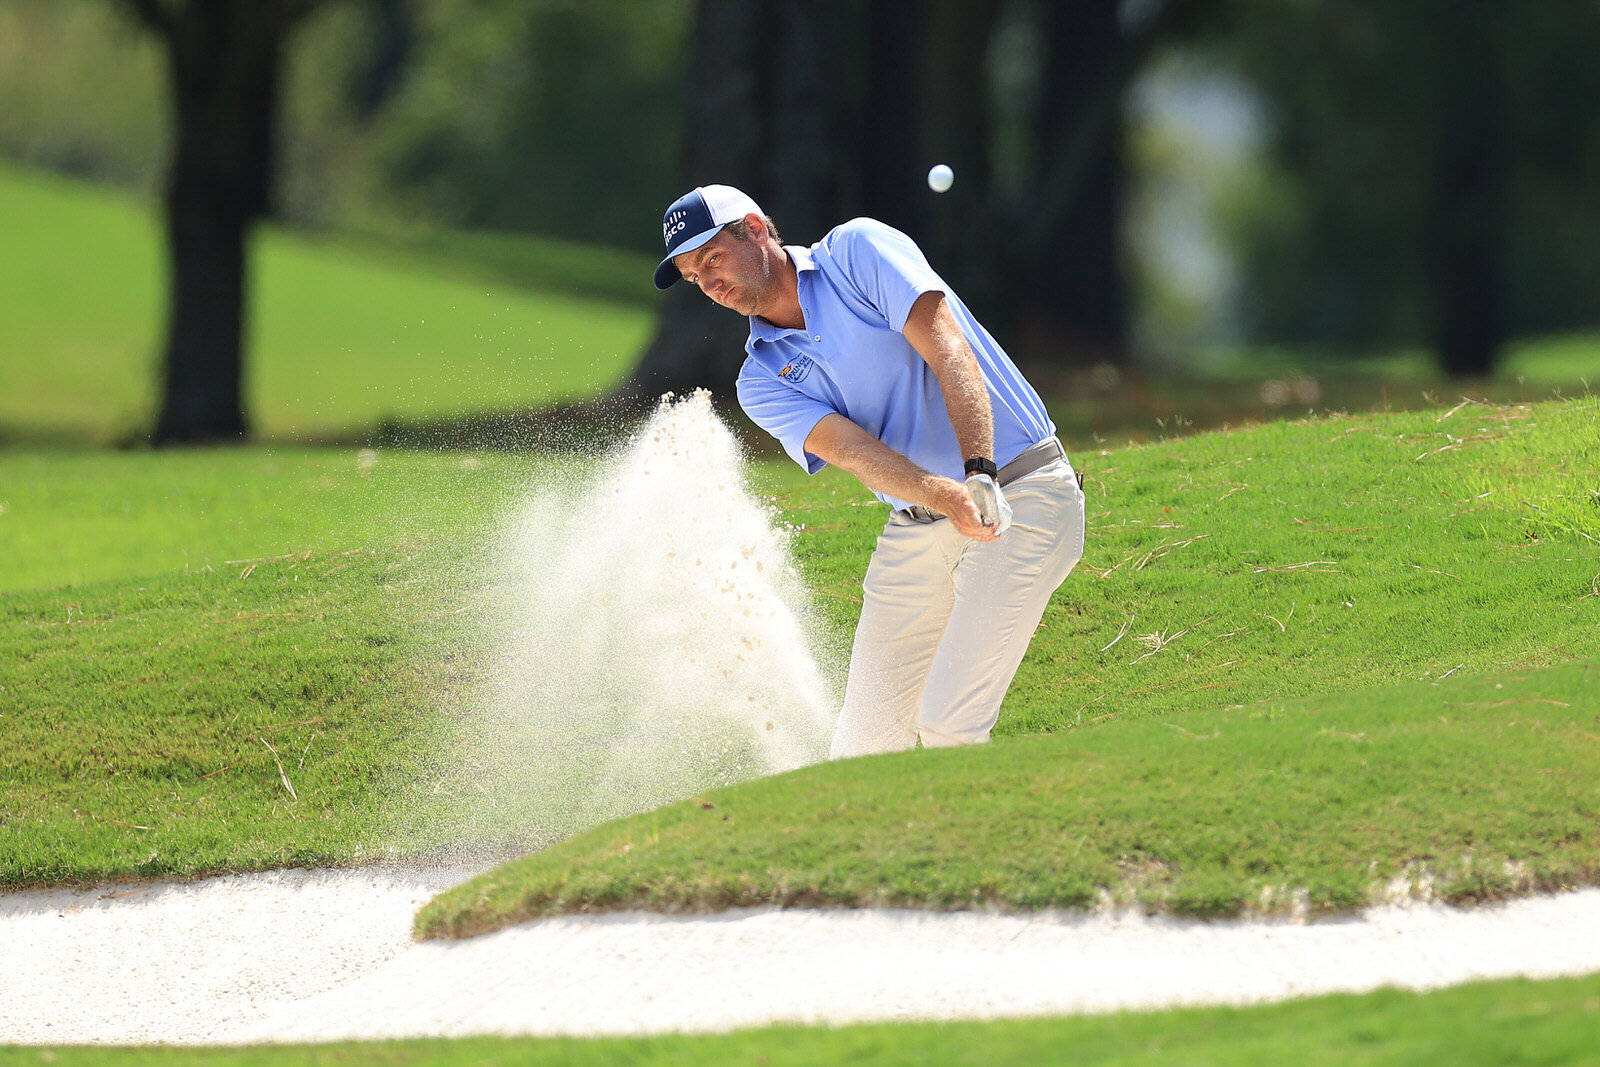  MEMPHIS, TENNESSEE - JULY 31: Brendon Todd of the United States plays a shot from a bunker on the 16th hole during the second round of the World Golf Championship-FedEx St Jude Invitational at TPC Southwind on July 31, 2020 in Memphis, Tennessee. (P